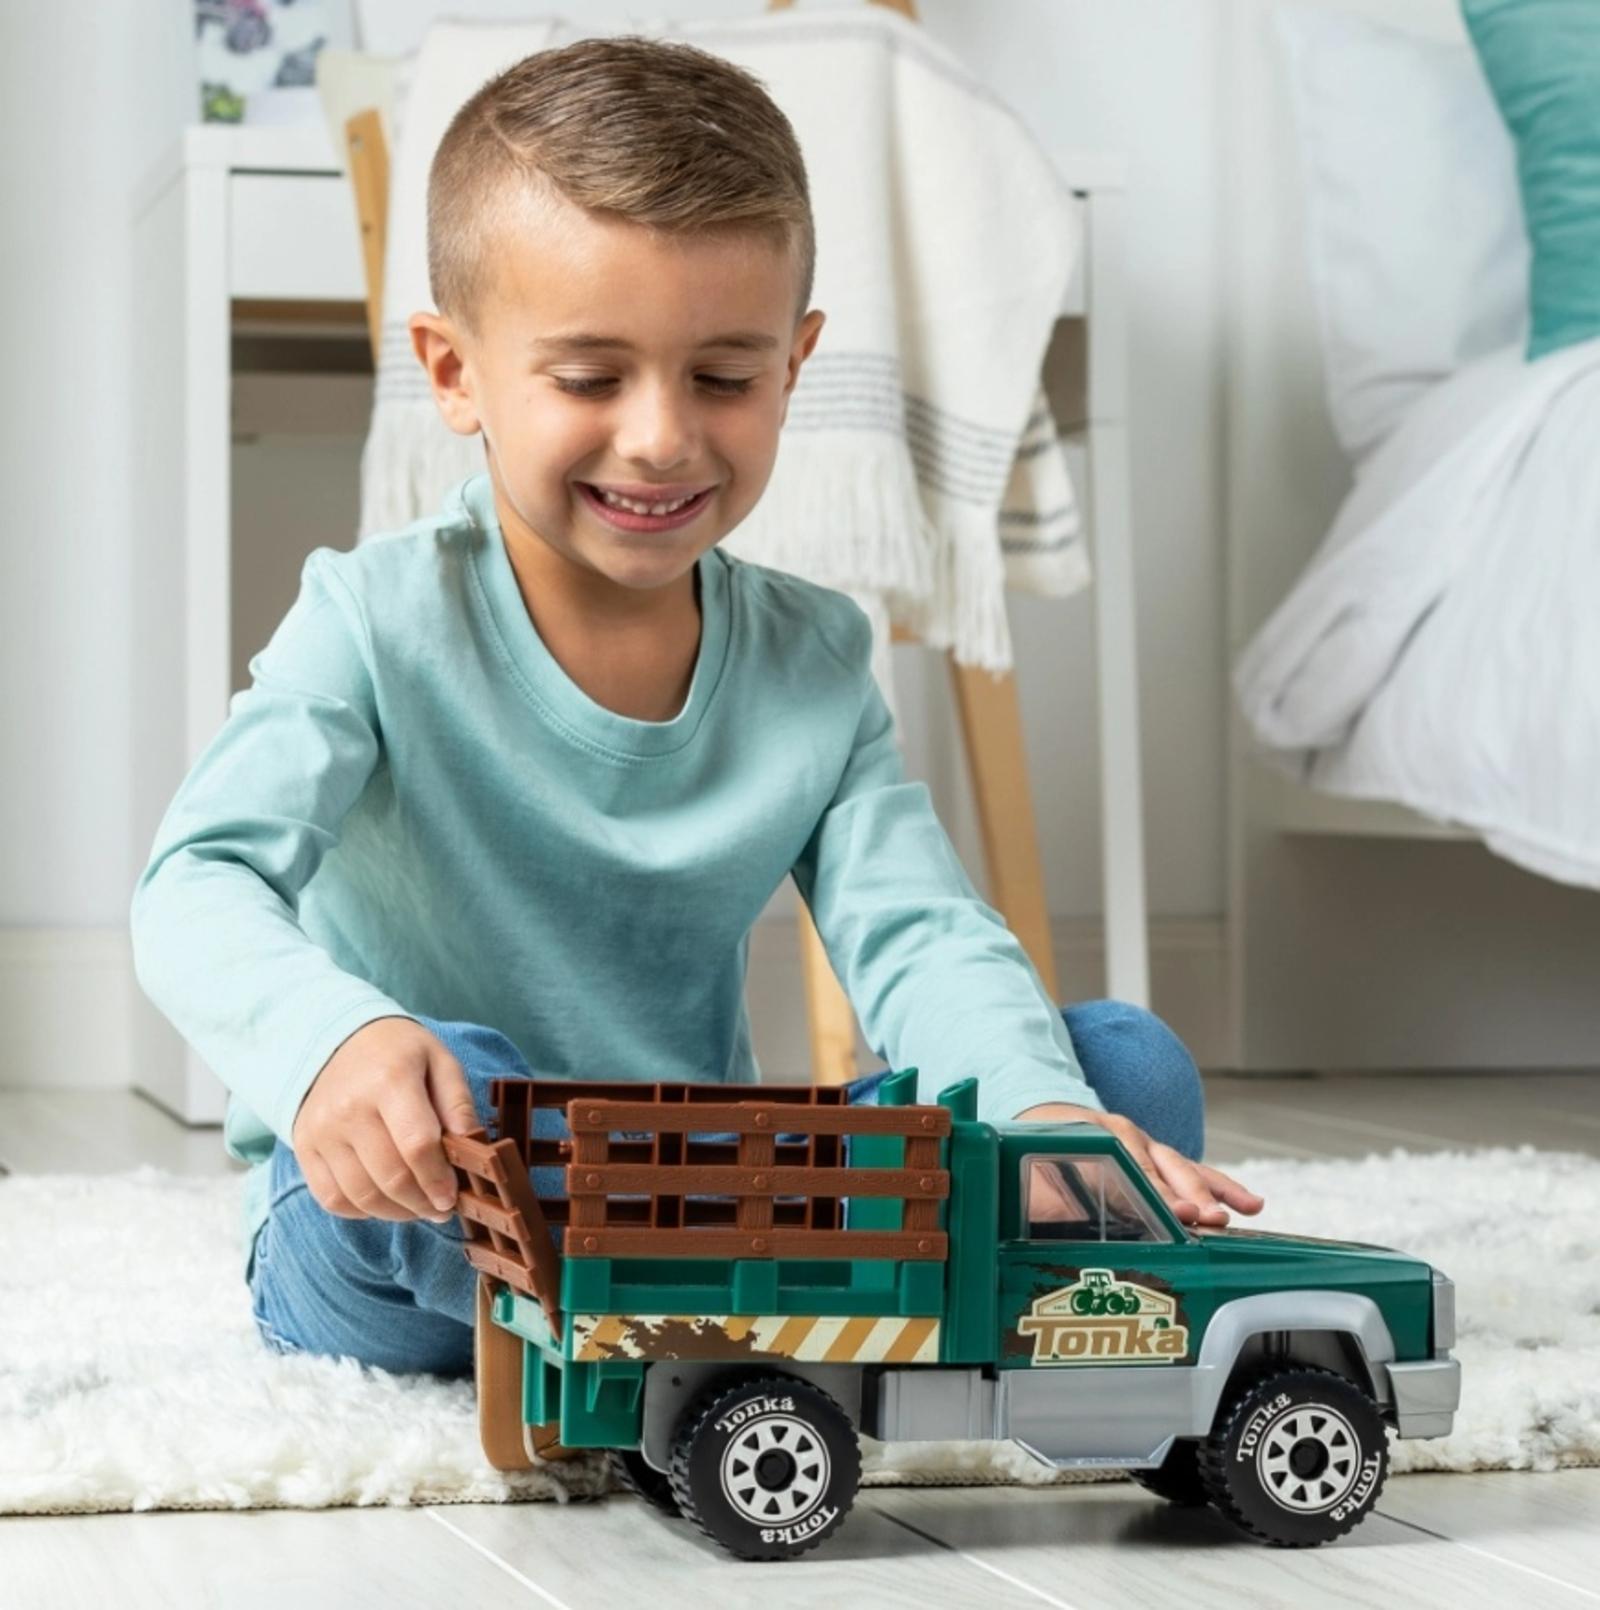  kid playing with truck